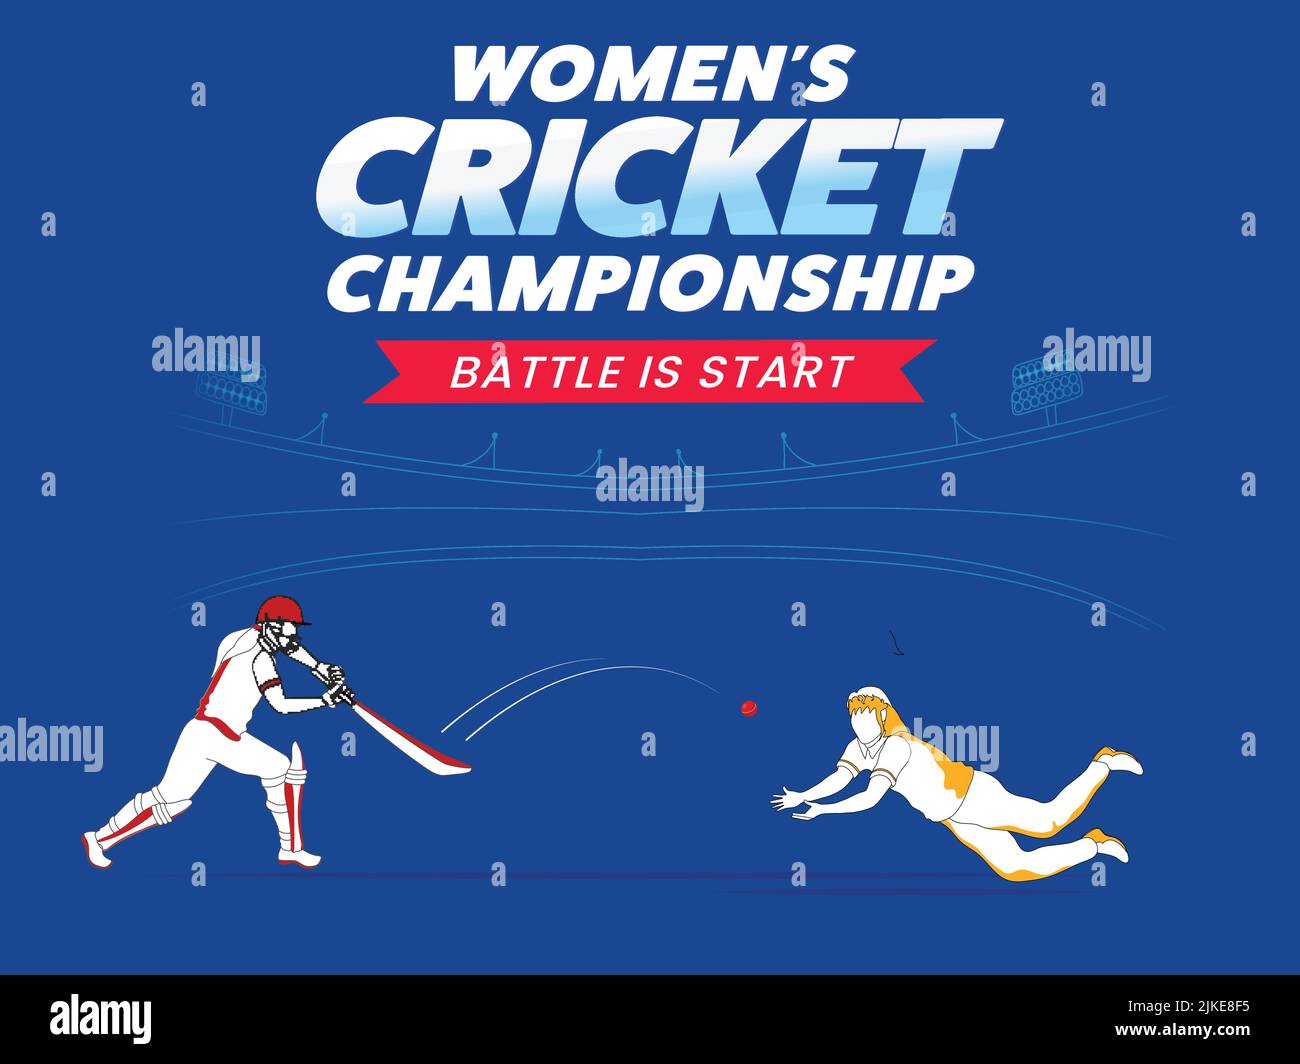 Battle Is Start, Women's Cricket Championship Concept With Doodle Batter Player Hitting The Ball And Fielder Or Bowler In Catch Pose On Blue Backgroun Stock Vector